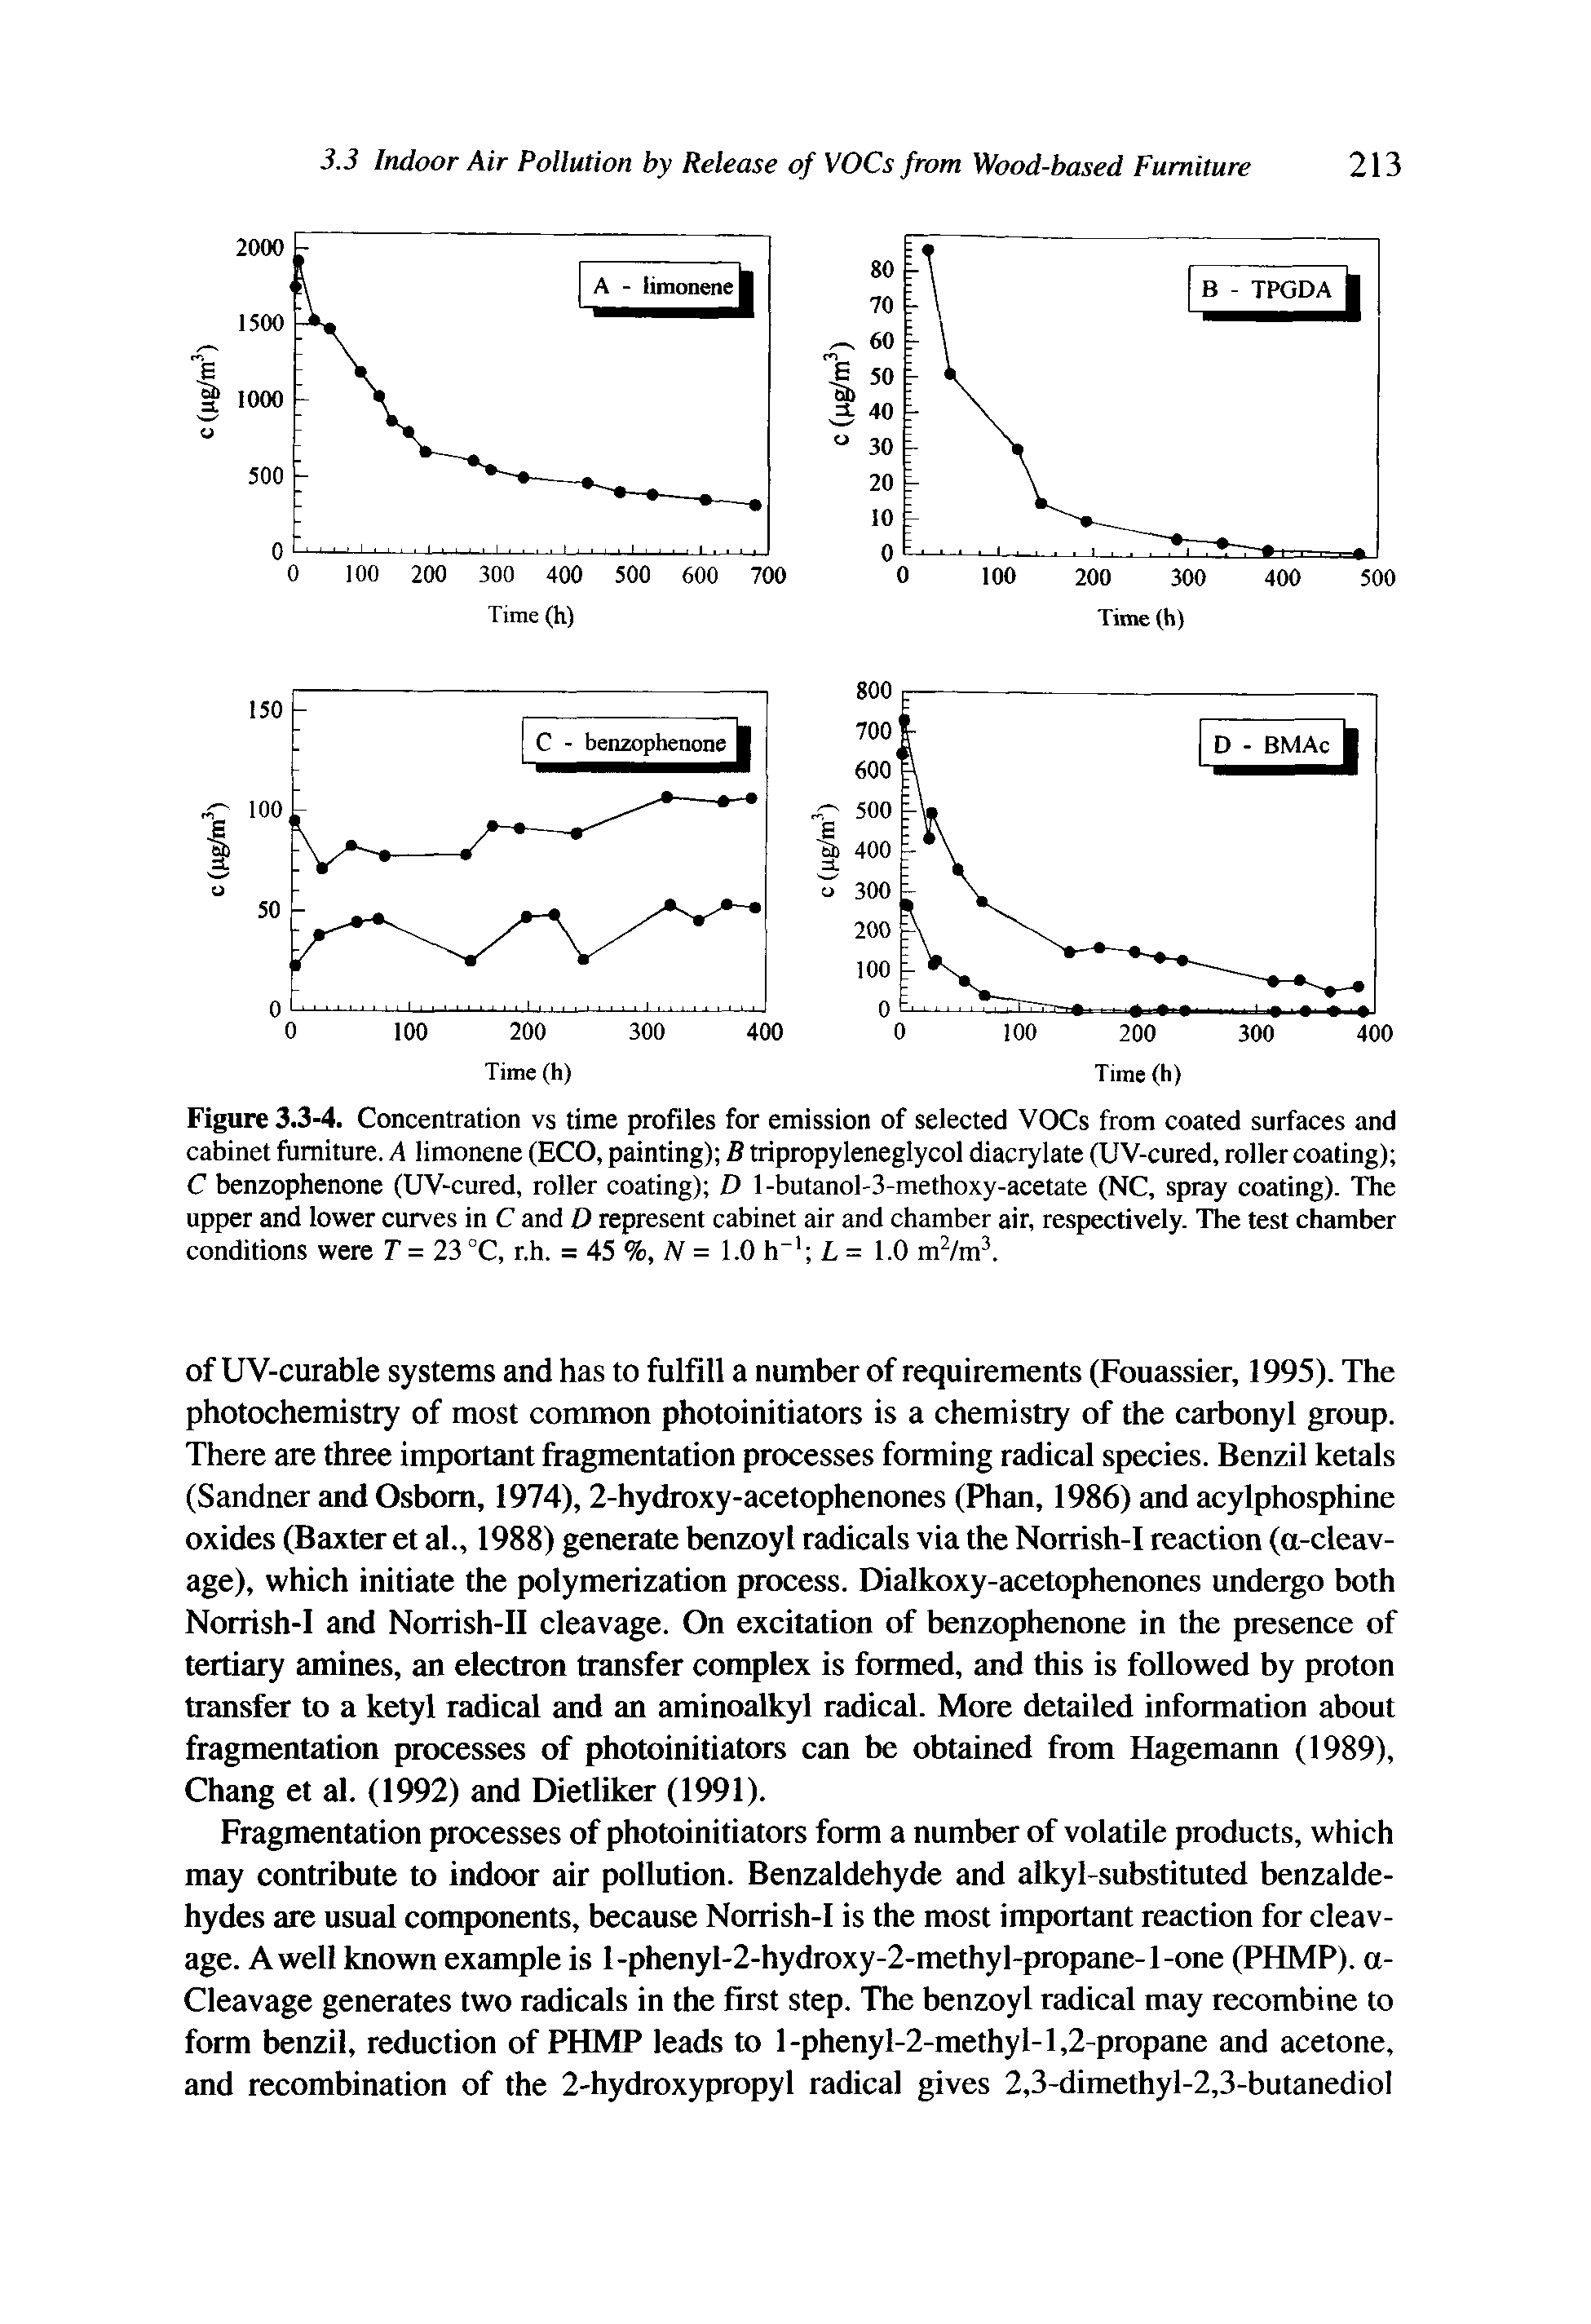 Figure 3.3-4. Concentration vs time profiles for emission of selected VOCs from coated surfaces and cabinet furniture. A limonene (ECO, painting) B tripropyleneglycol diacrylate (UV-cured, roller coating) C benzophenone (UV-cured, roller coating) D l-butanol-3-methoxy-acetate (NC, spray coating). The upper and lower curves in C and D represent cabinet air and chamber air, respectively. The test chamber conditions were T =23 °C, r.h. = 45 %, V = 1.0 h L = 1.0 rrfixtf.